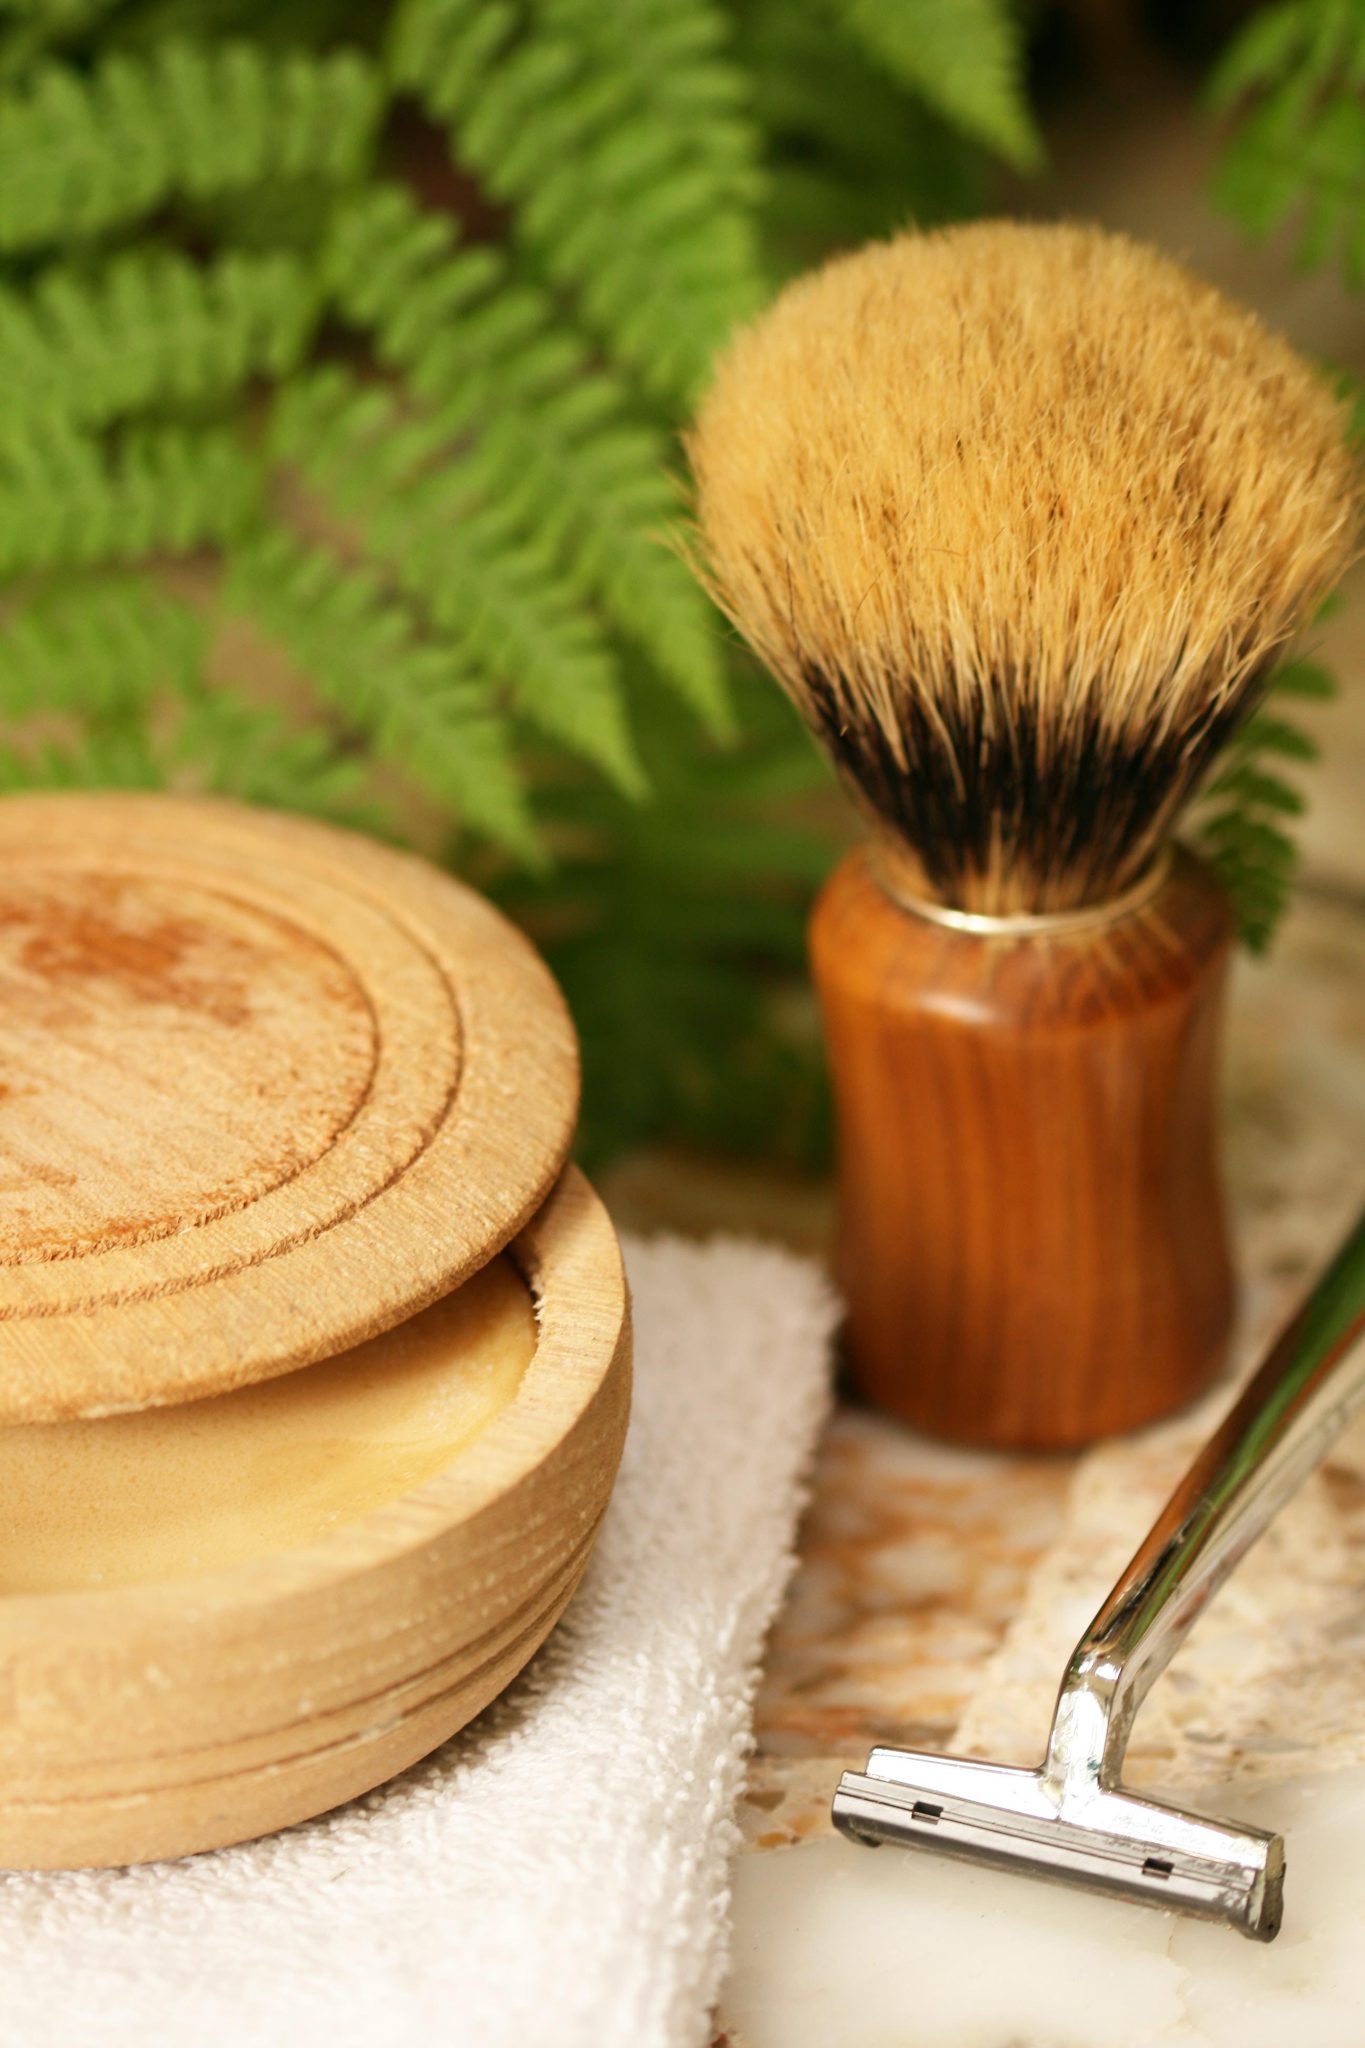 Are Badgers killed to make shaving brushes?